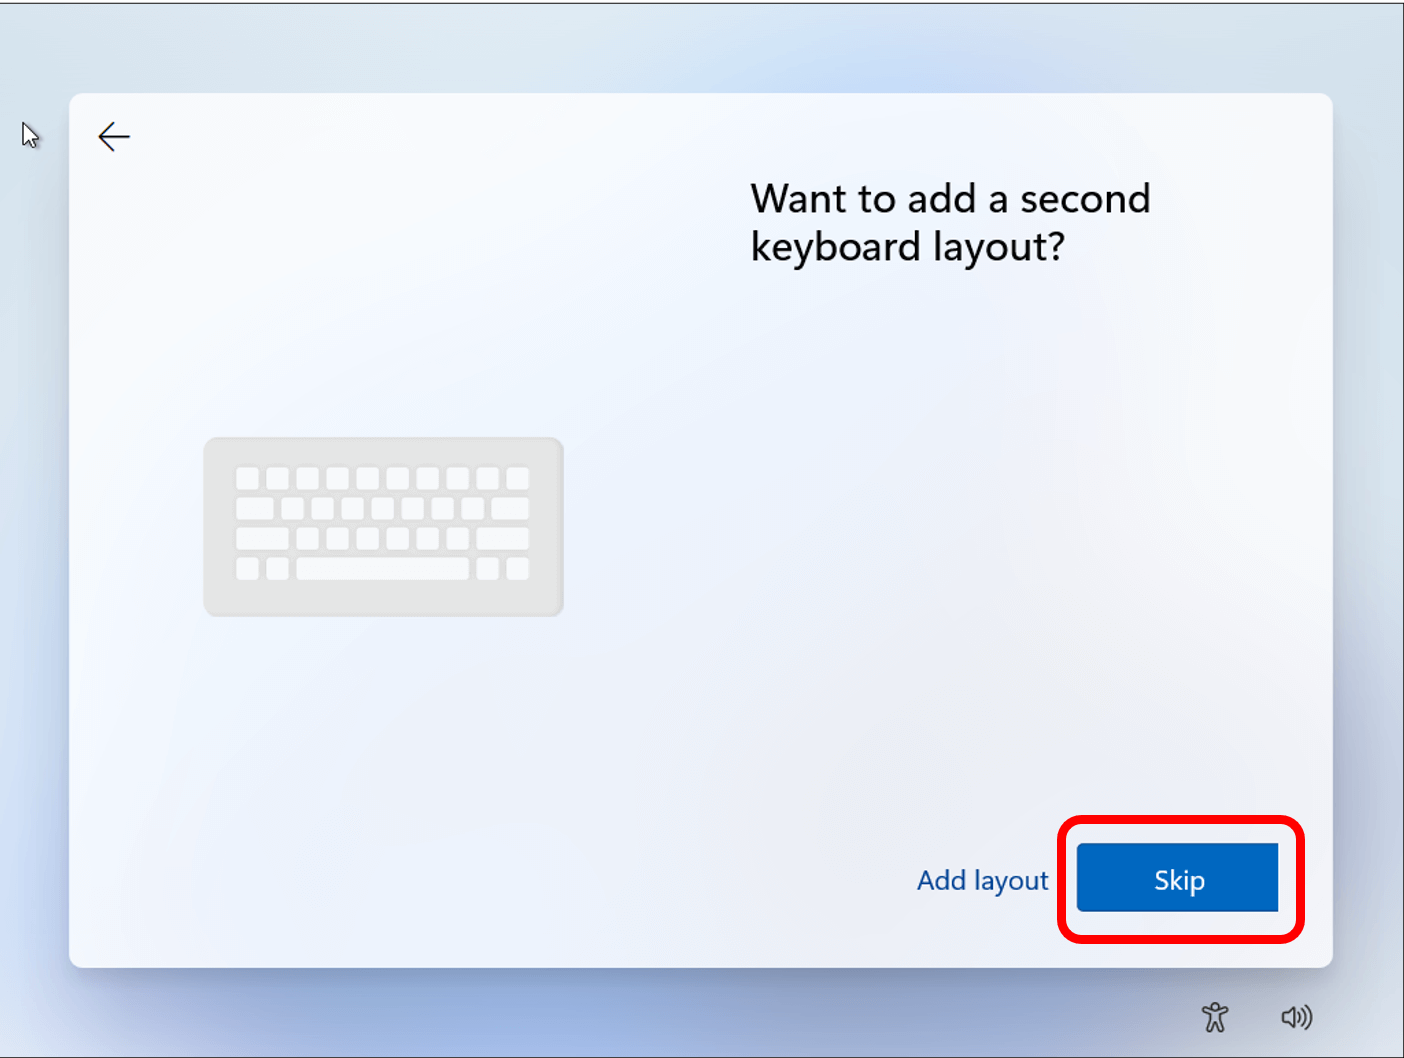 Screen asking to add a second keyboard layout and skip button highlighted in red at bottom of the screen.